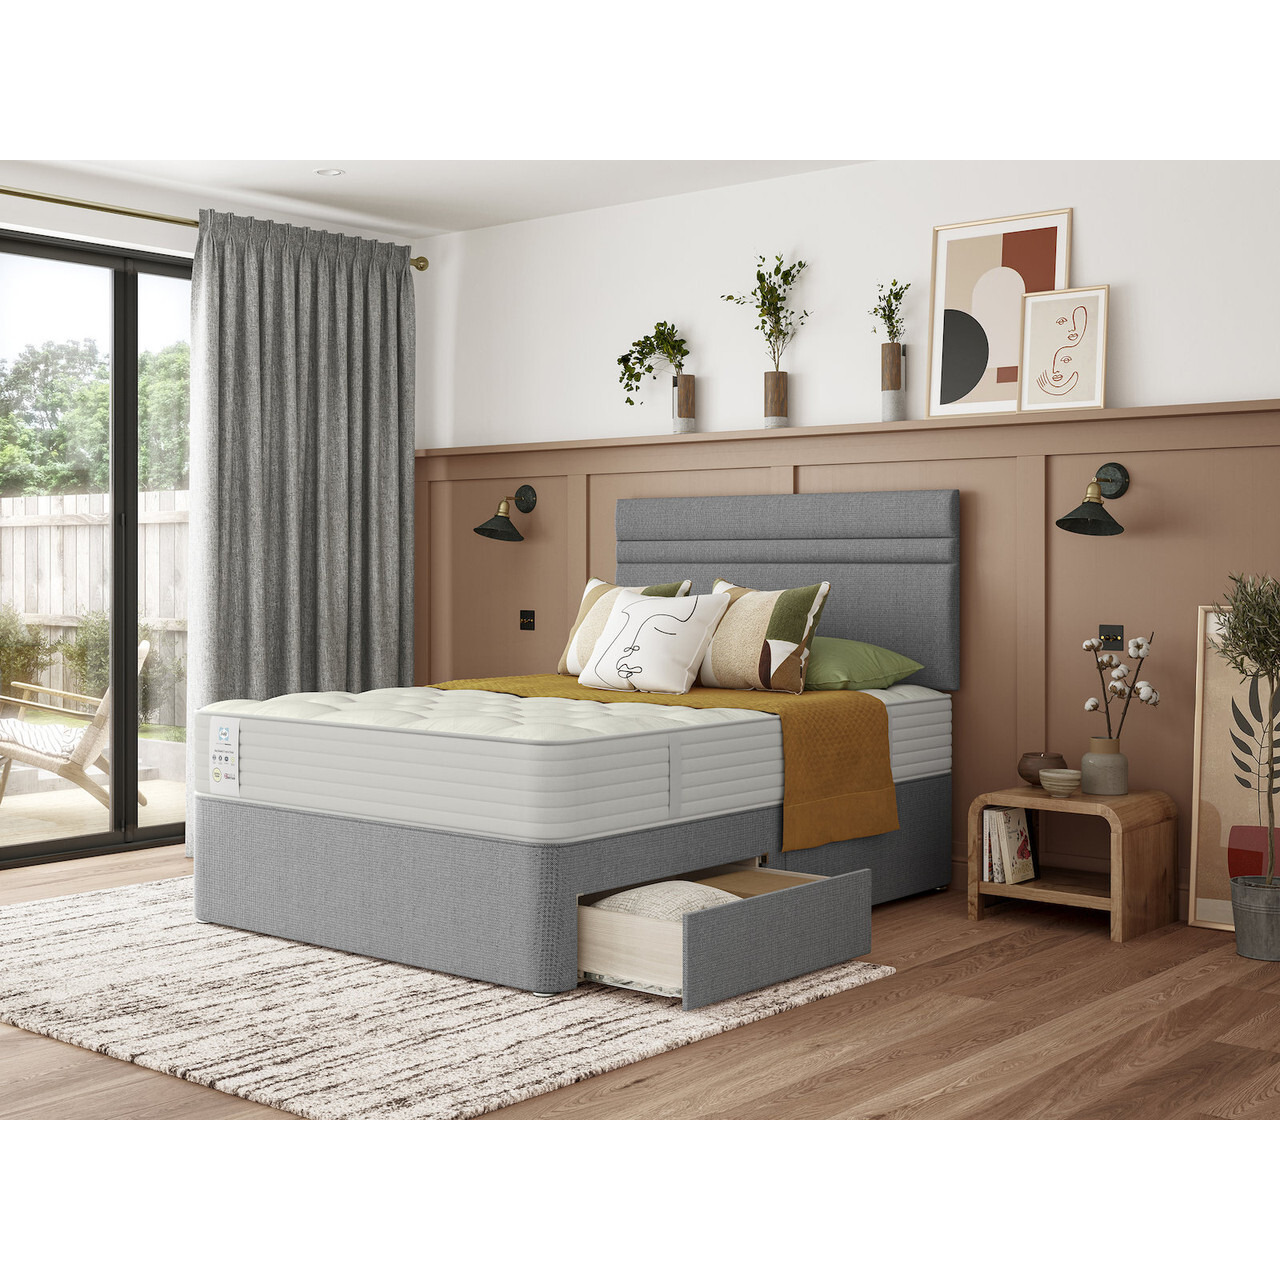 Sealy Auckland Extra Firm Divan Bed Set - image 1